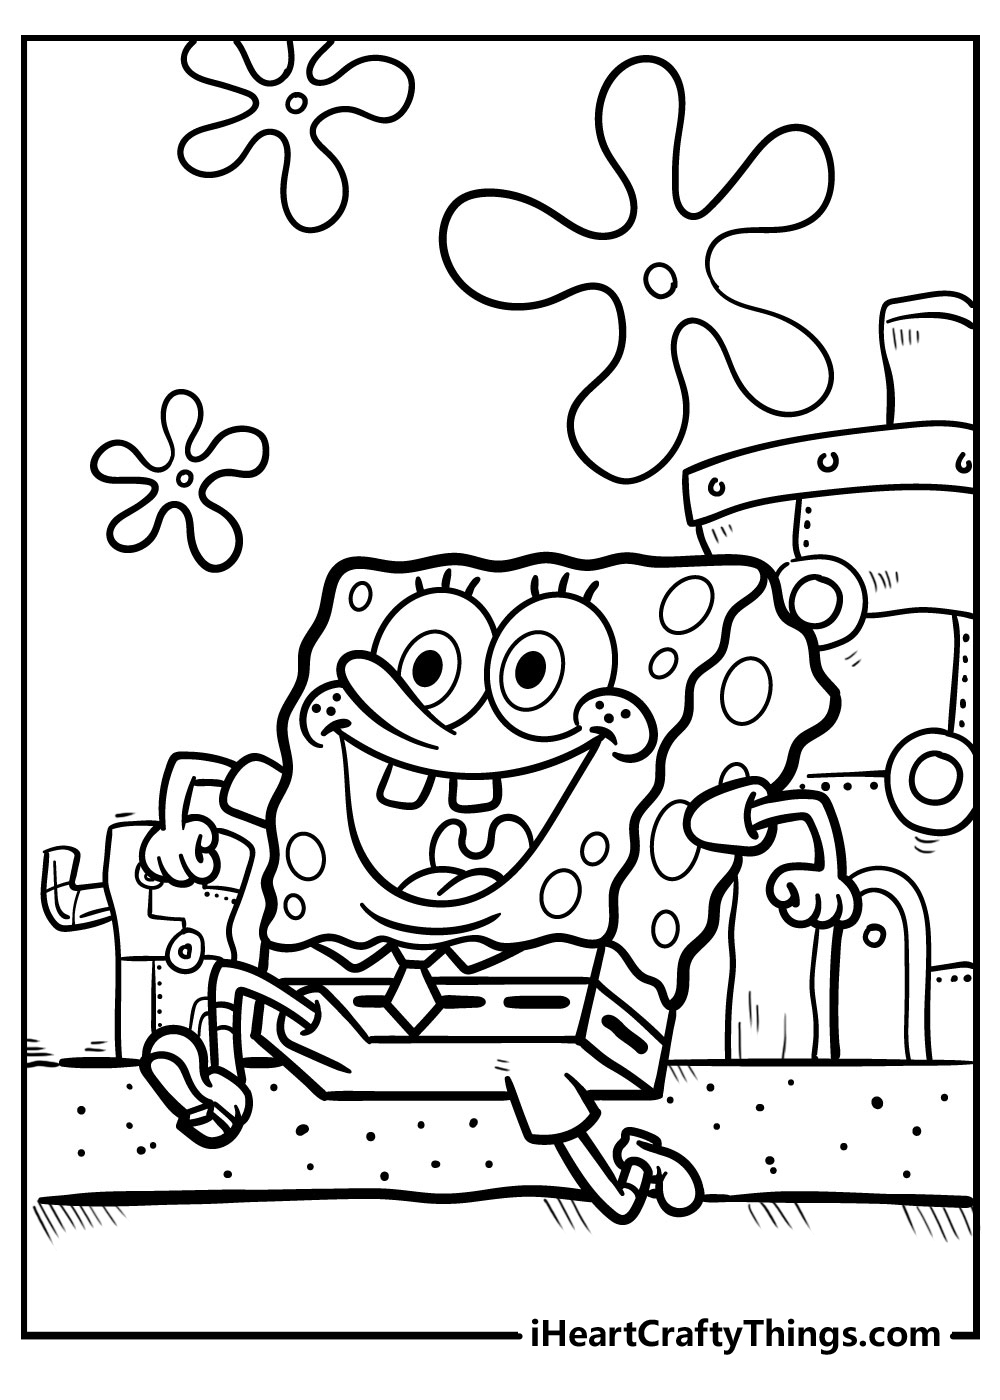 20 Super Fun Spongebob Coloring Pages Updated 20